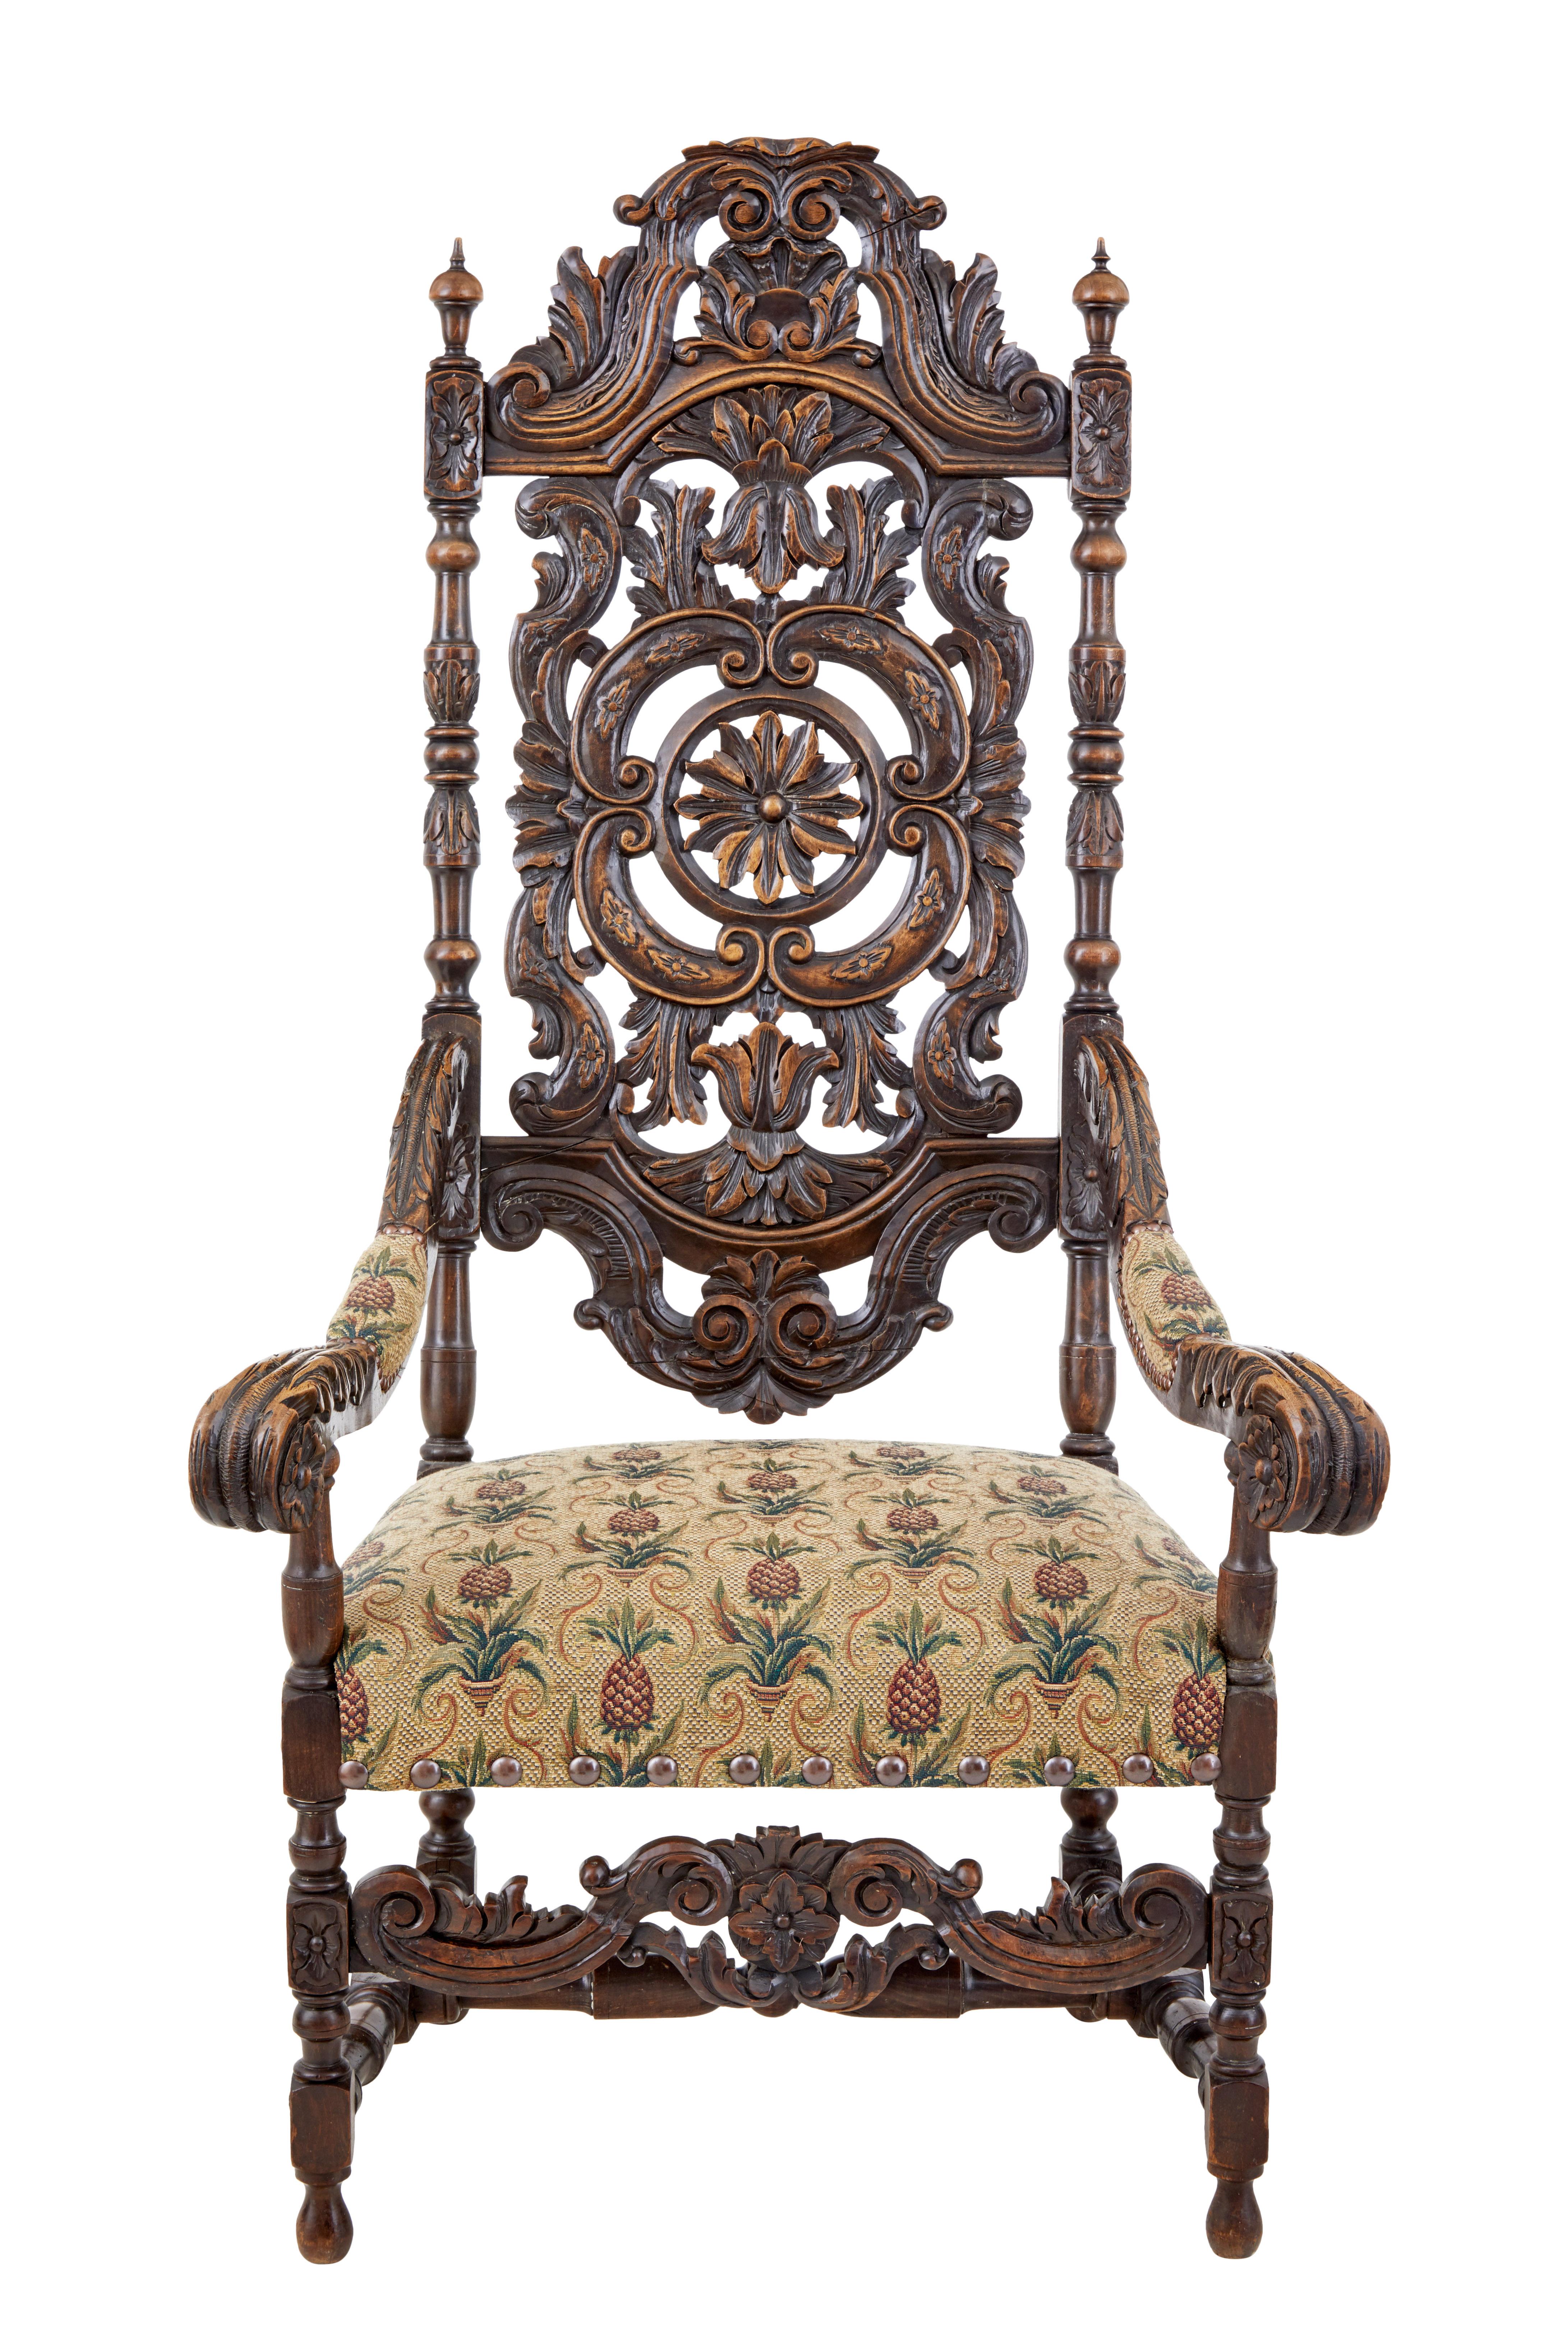 Profusely carved walnut armchair in the carolean taste, circa 1890.

Carved swags and a central sunburst are showcased on the backrest of this chair. Heavy carved scrolling arms leading down to the carved rail. Turned legs united by turned